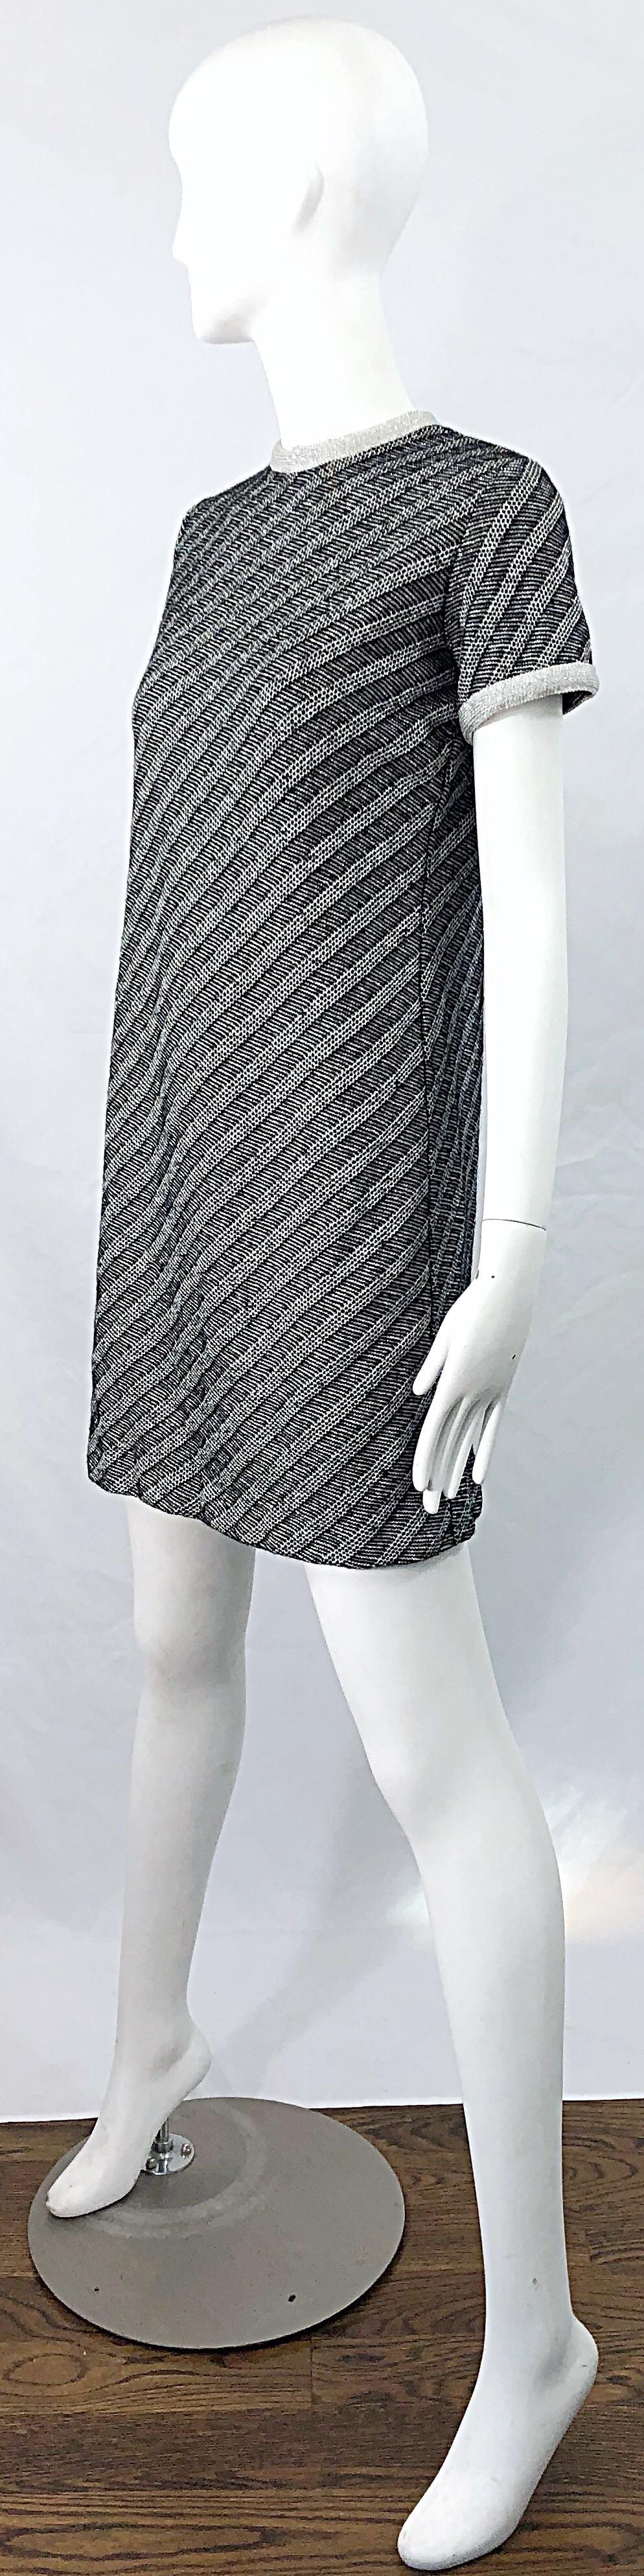 Chic 1960s Black and Silver Metallic Knit Vintage Striped 60s Shift Dress For Sale 2